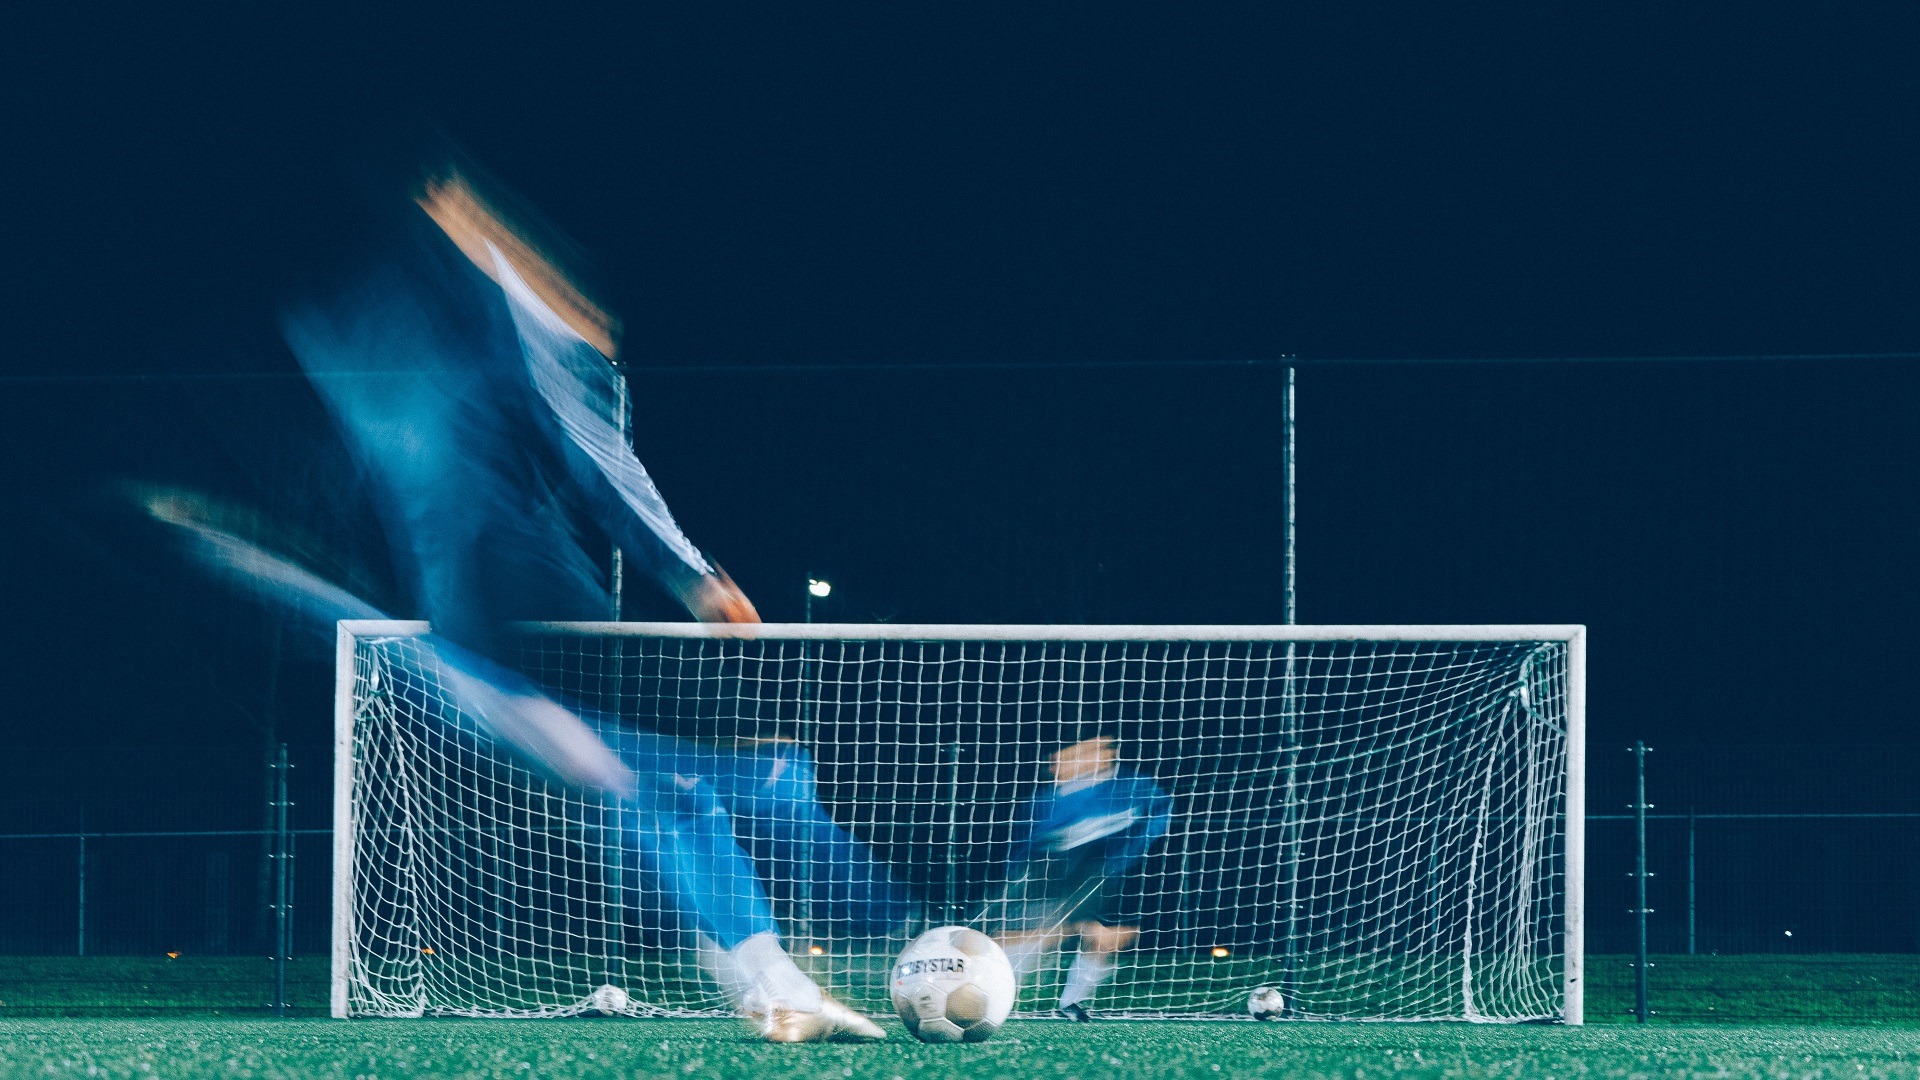 Football Factly on X: The perfect football player according to AI